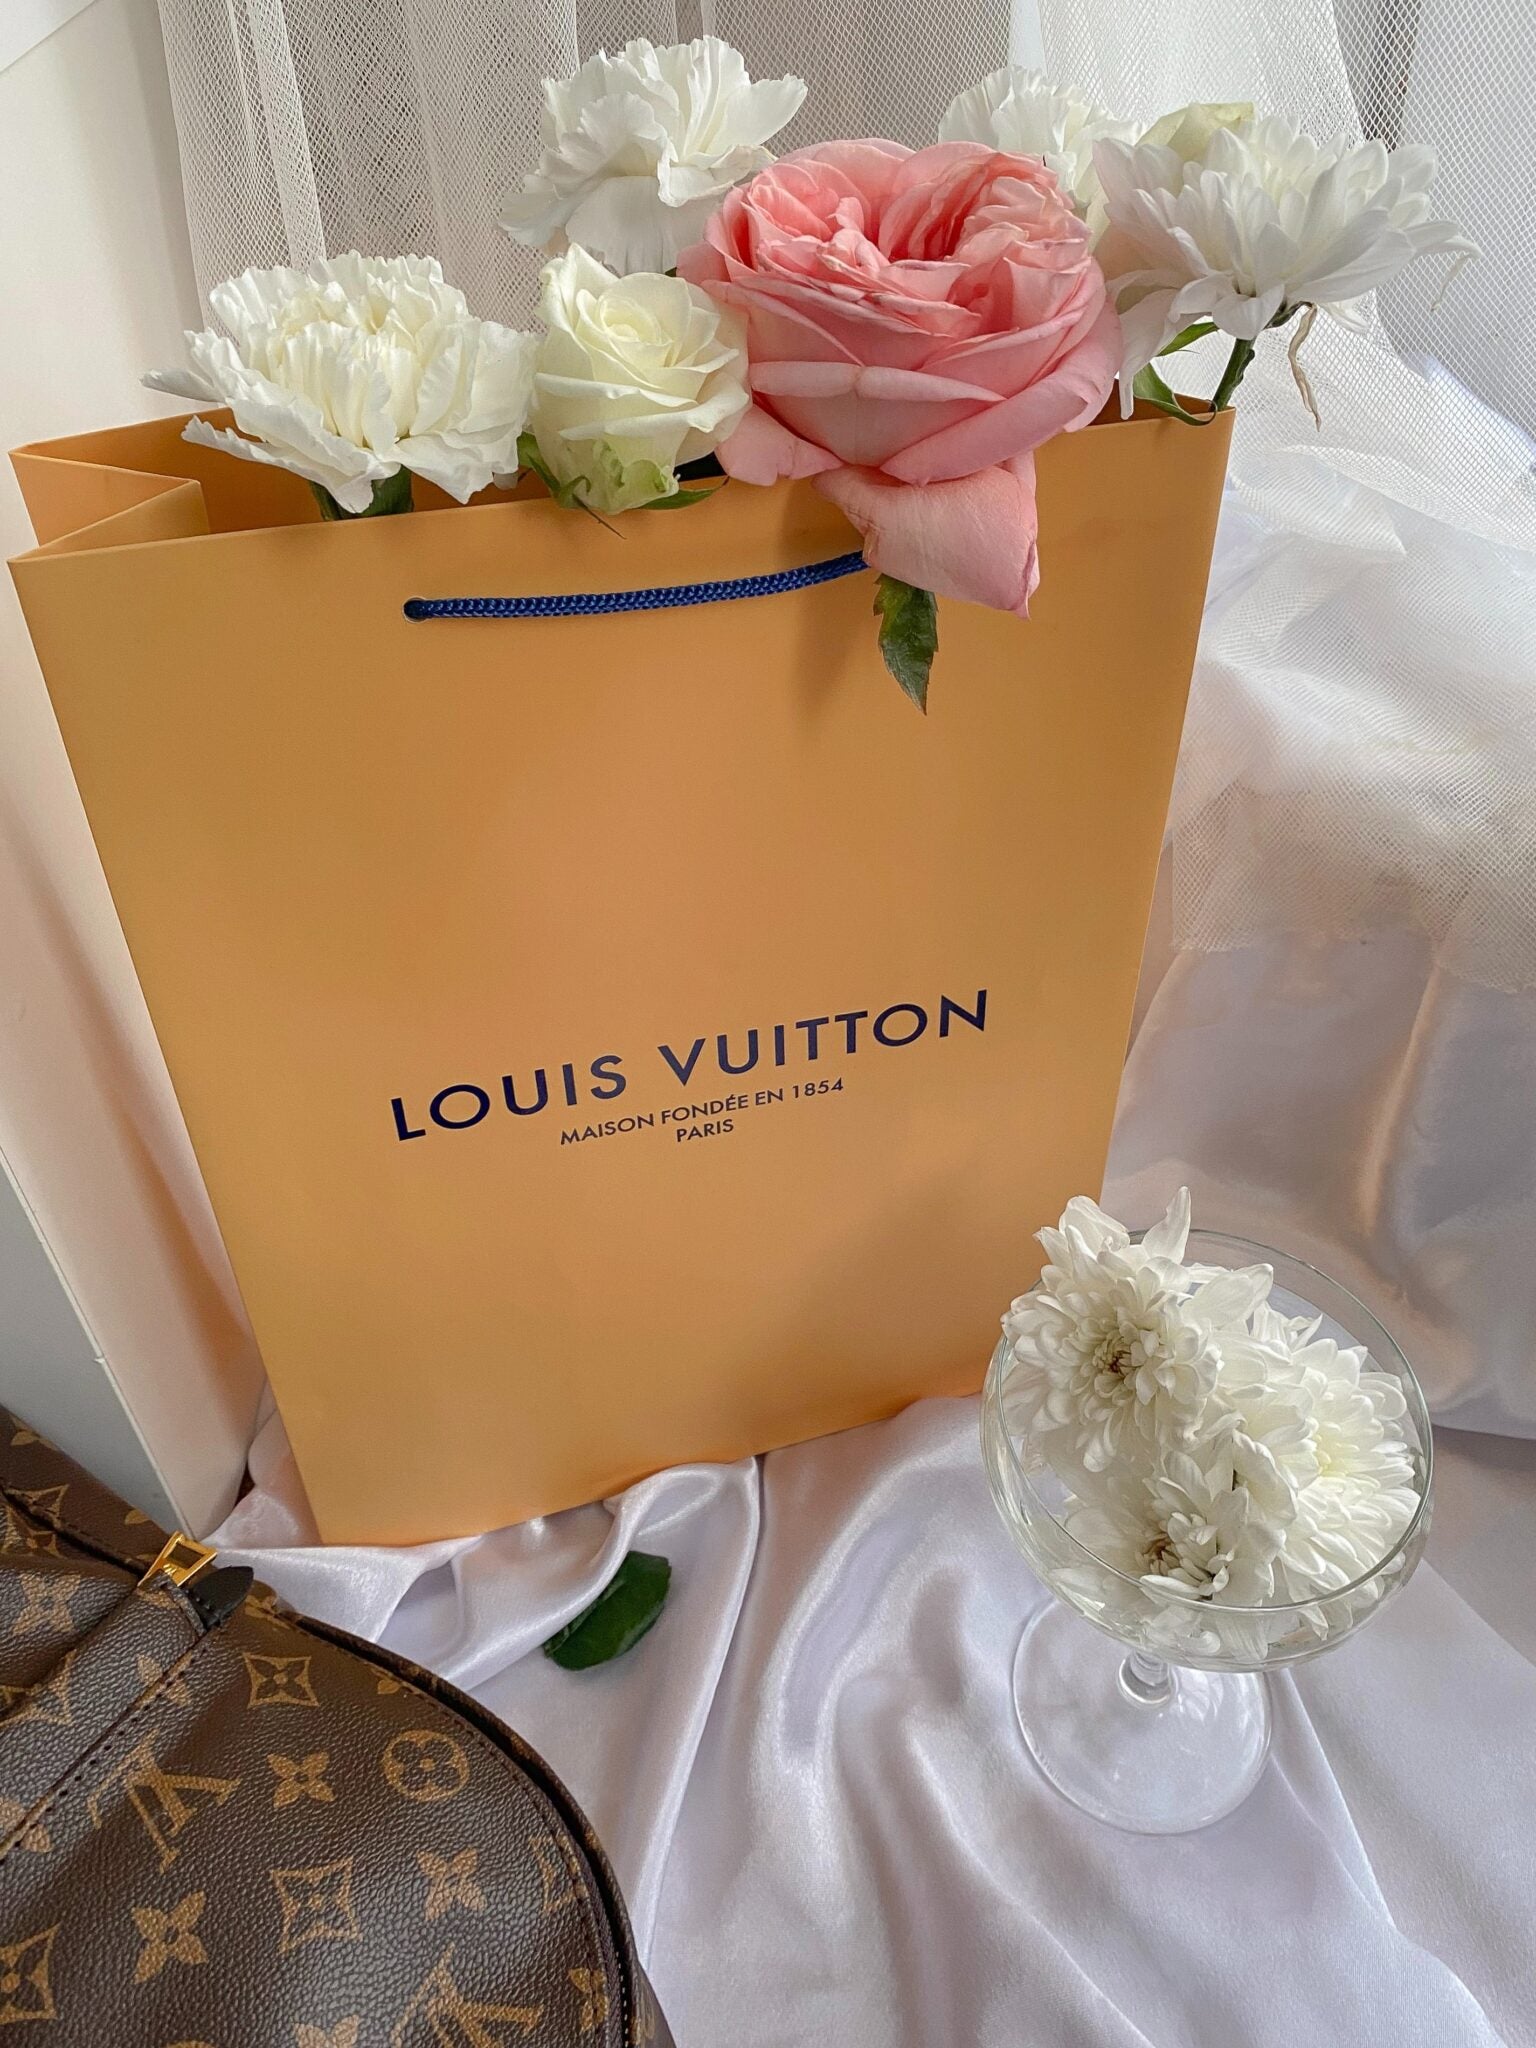 Rent Louis Vuitton Bags  89Month  Luxury Bag rentals Styletheory SG   Style Theory SG